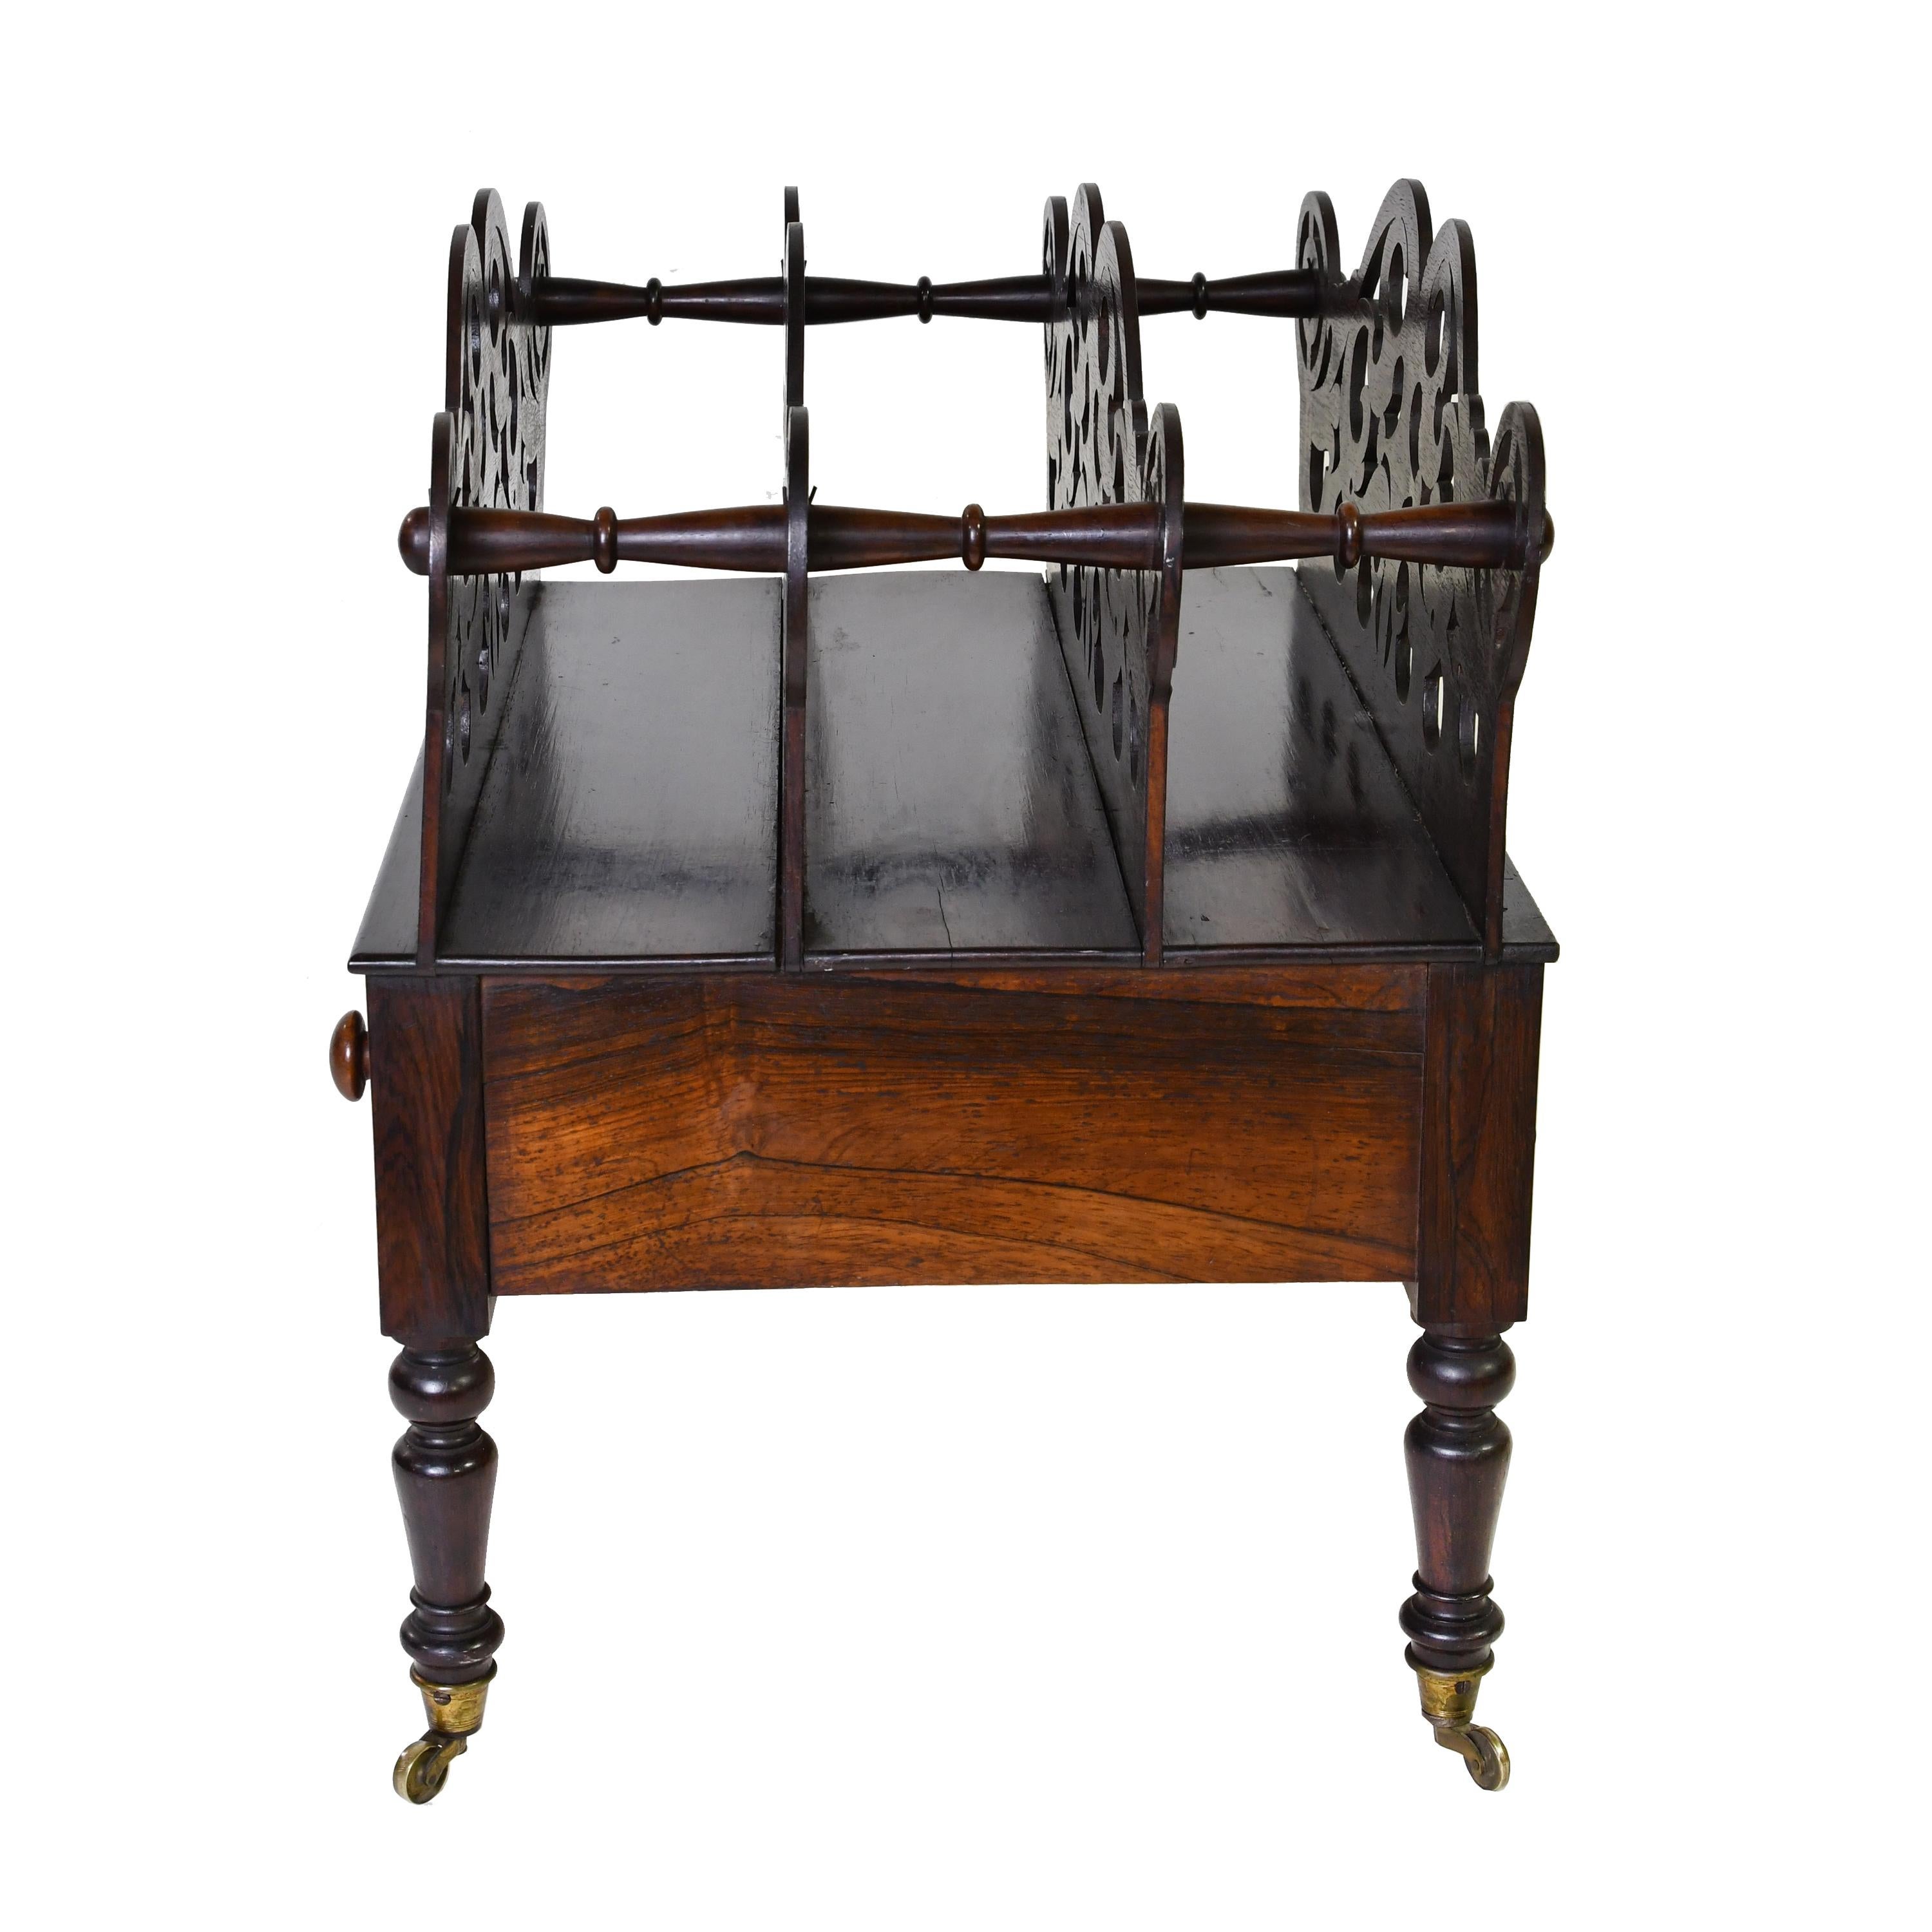 Cast William IV Canterbury or Sheet Music Rack in Rosewood with Fretwork, circa 1830